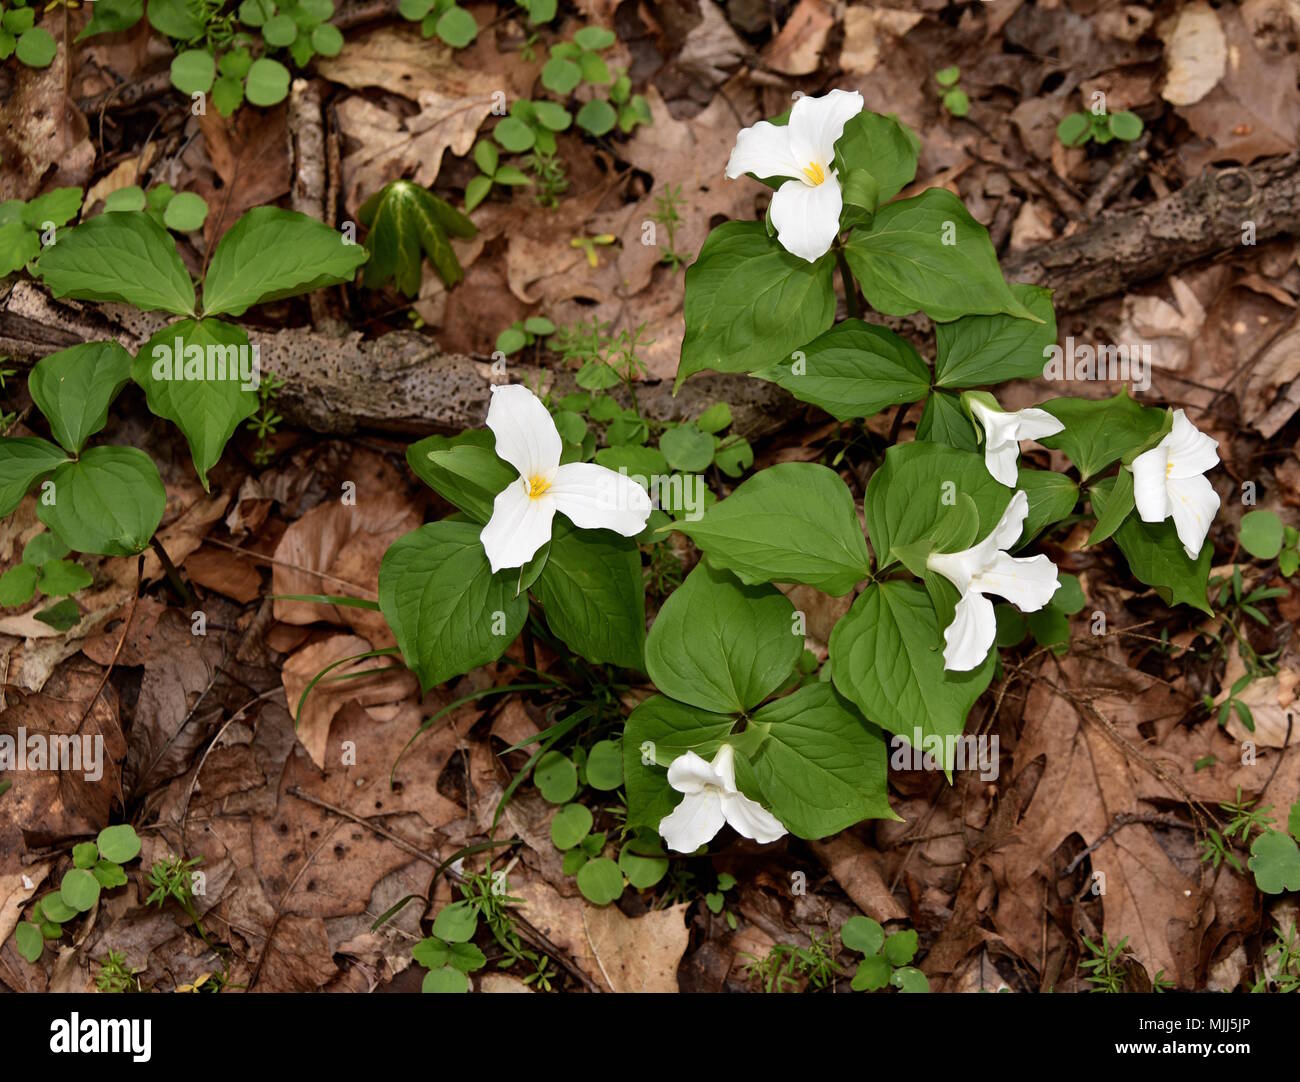 A group of large white trillium plants emerging in a spring forest. Stock Photo